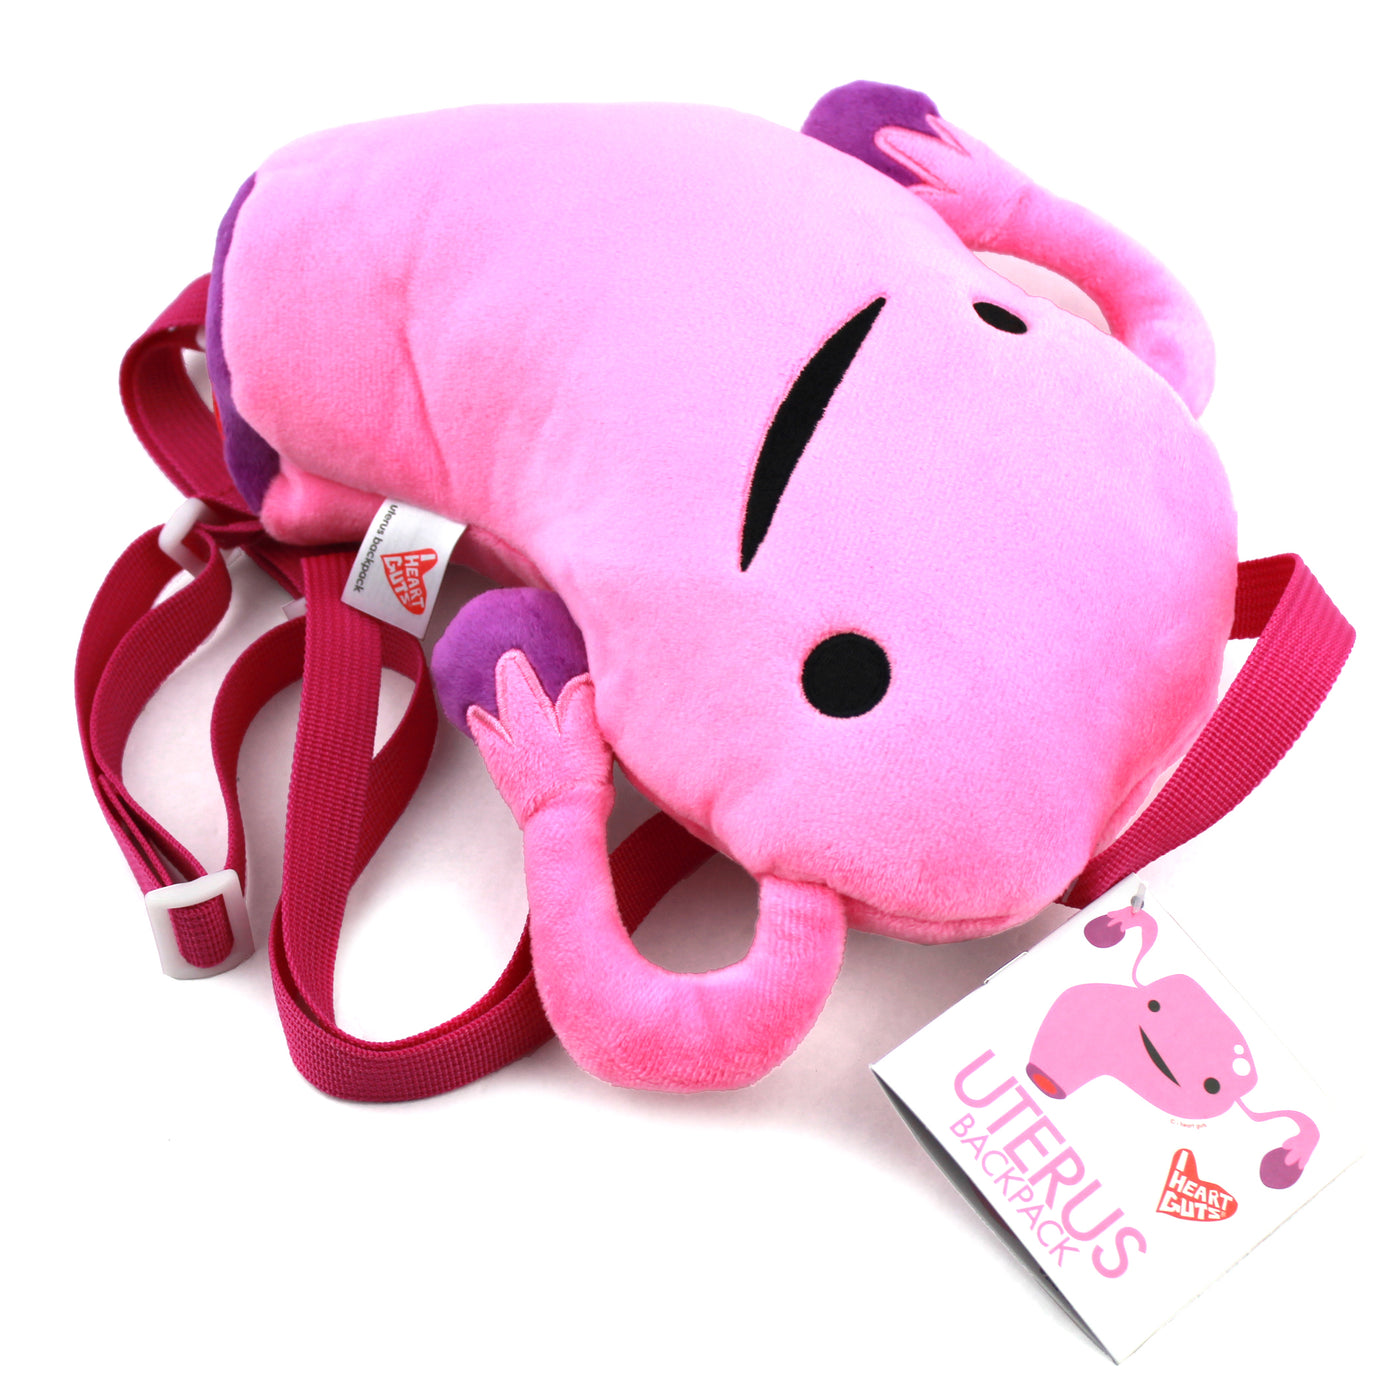 Uterus Plushie Backpack | Cute Fuzzy Womb Bag w/ Zipper & Adjustable Straps - I Heart Guts